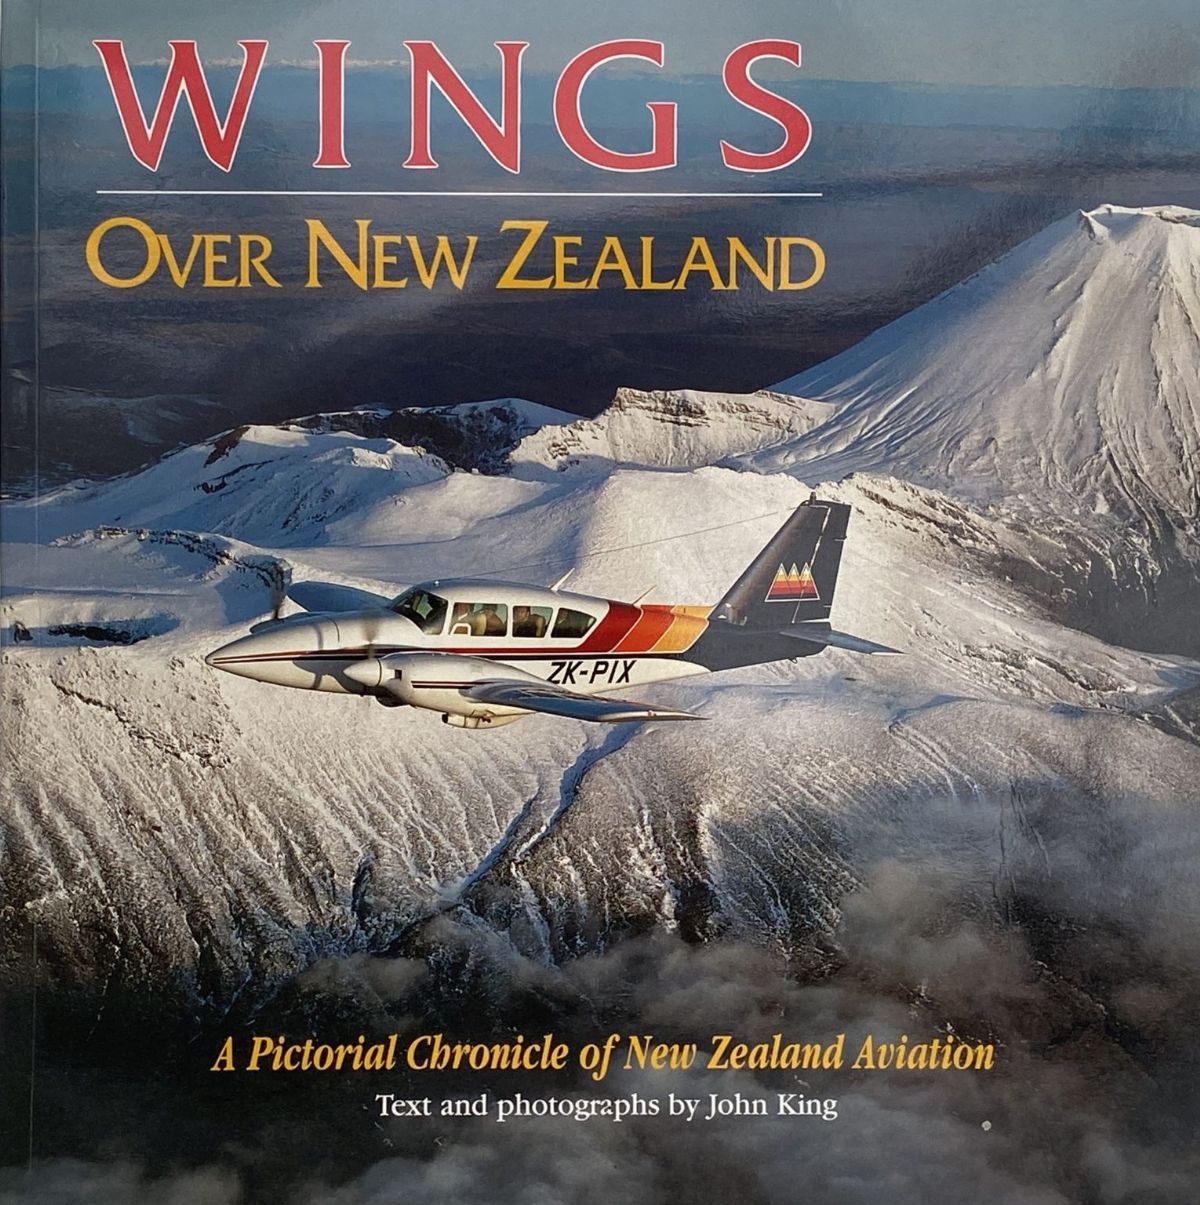 WINGS OVER NEW ZEALAND: A Pictorial Chronicle of New Zealand Aviation